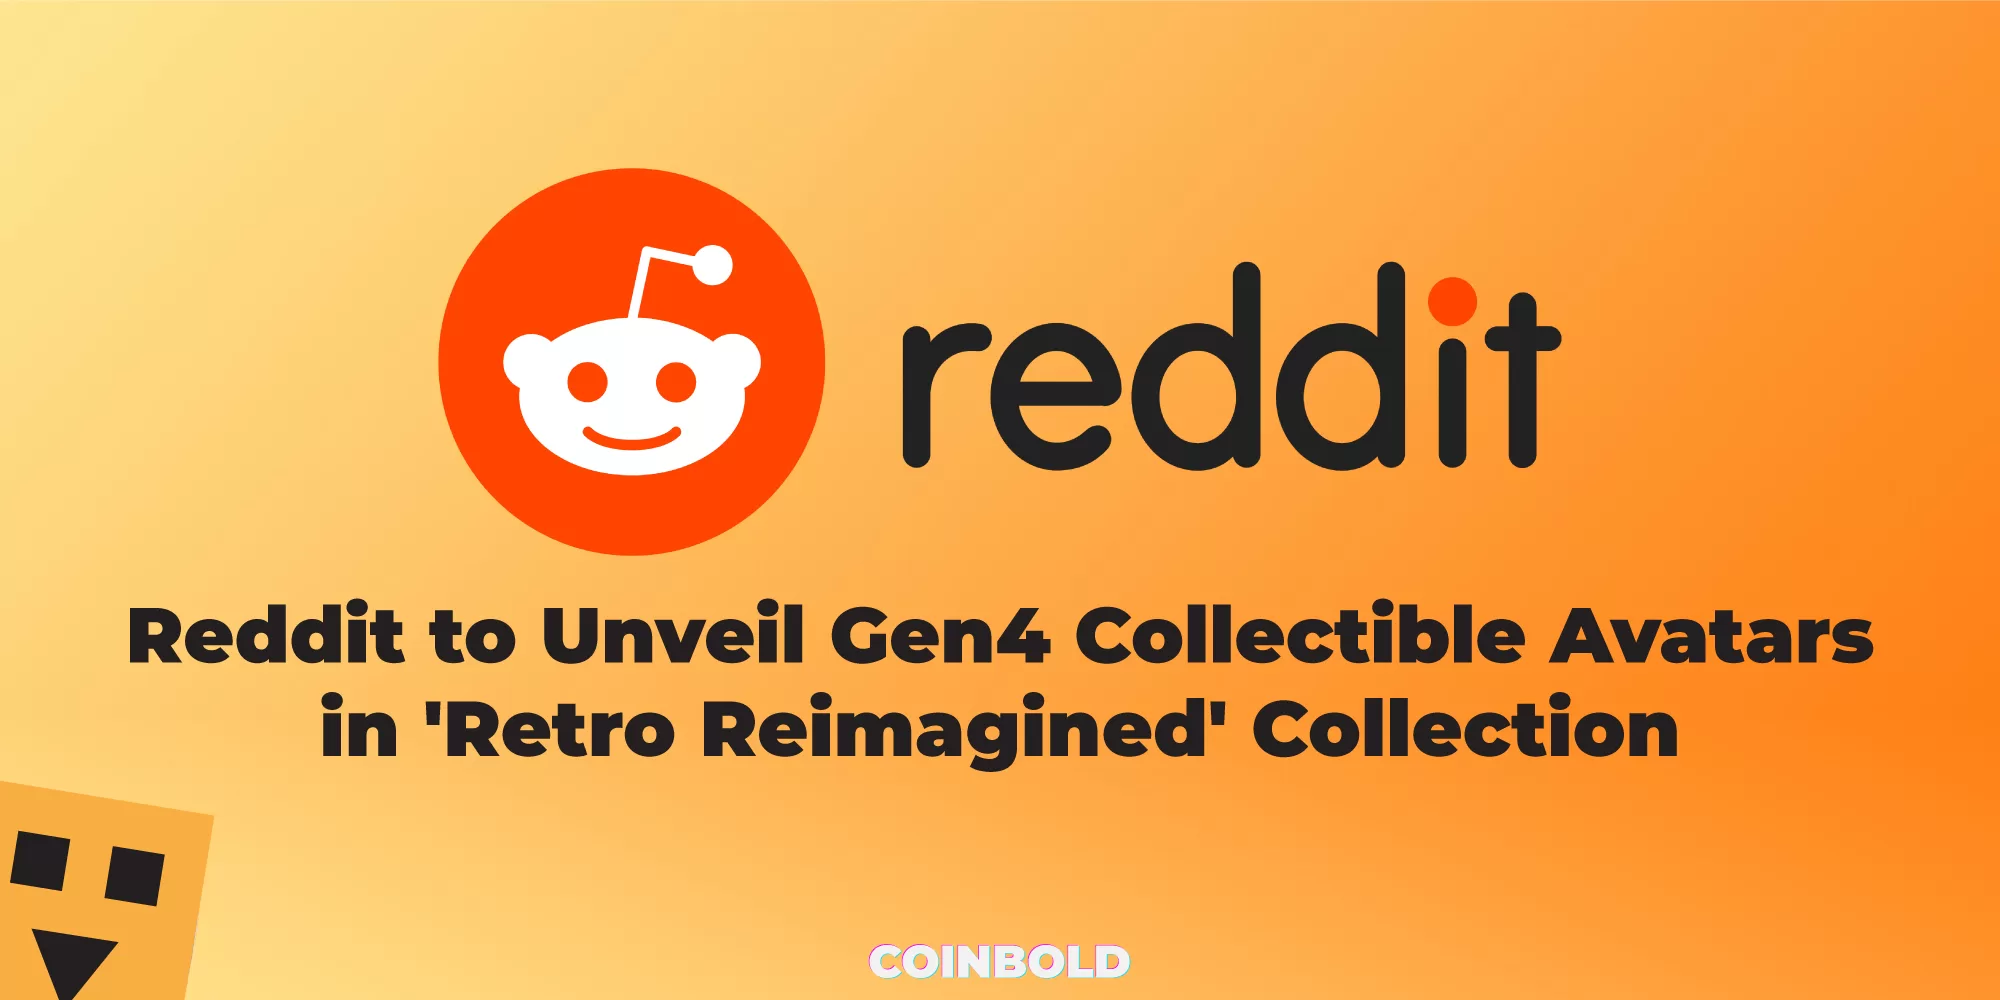 Reddit to Unveil Gen4 Collectible Avatars in 'Retro Reimagined' Collection